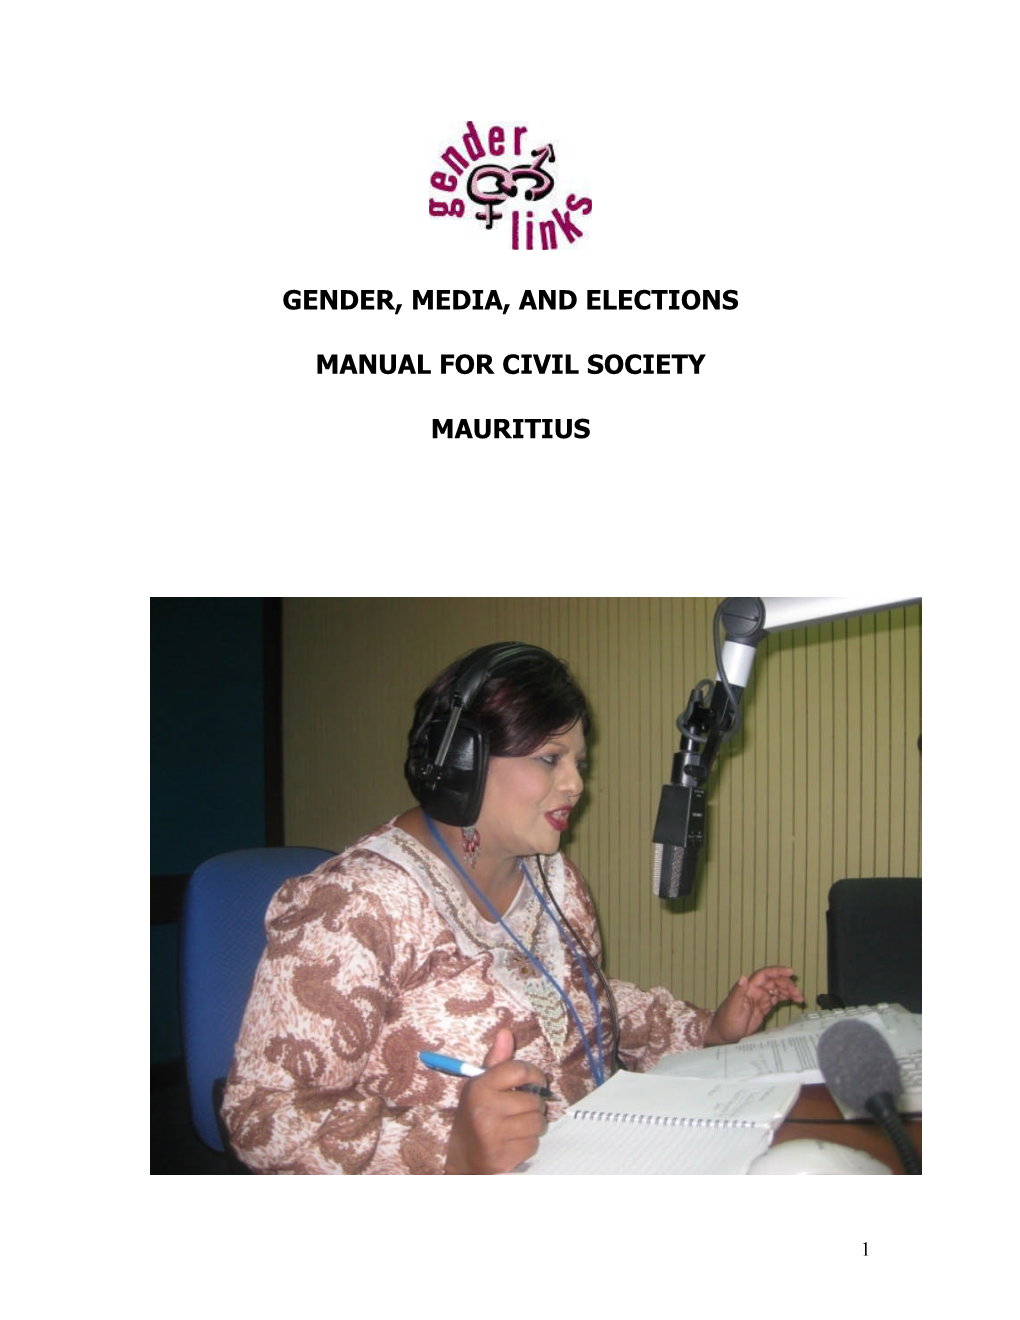 Gender, Media and Elections Manual for Civil Society